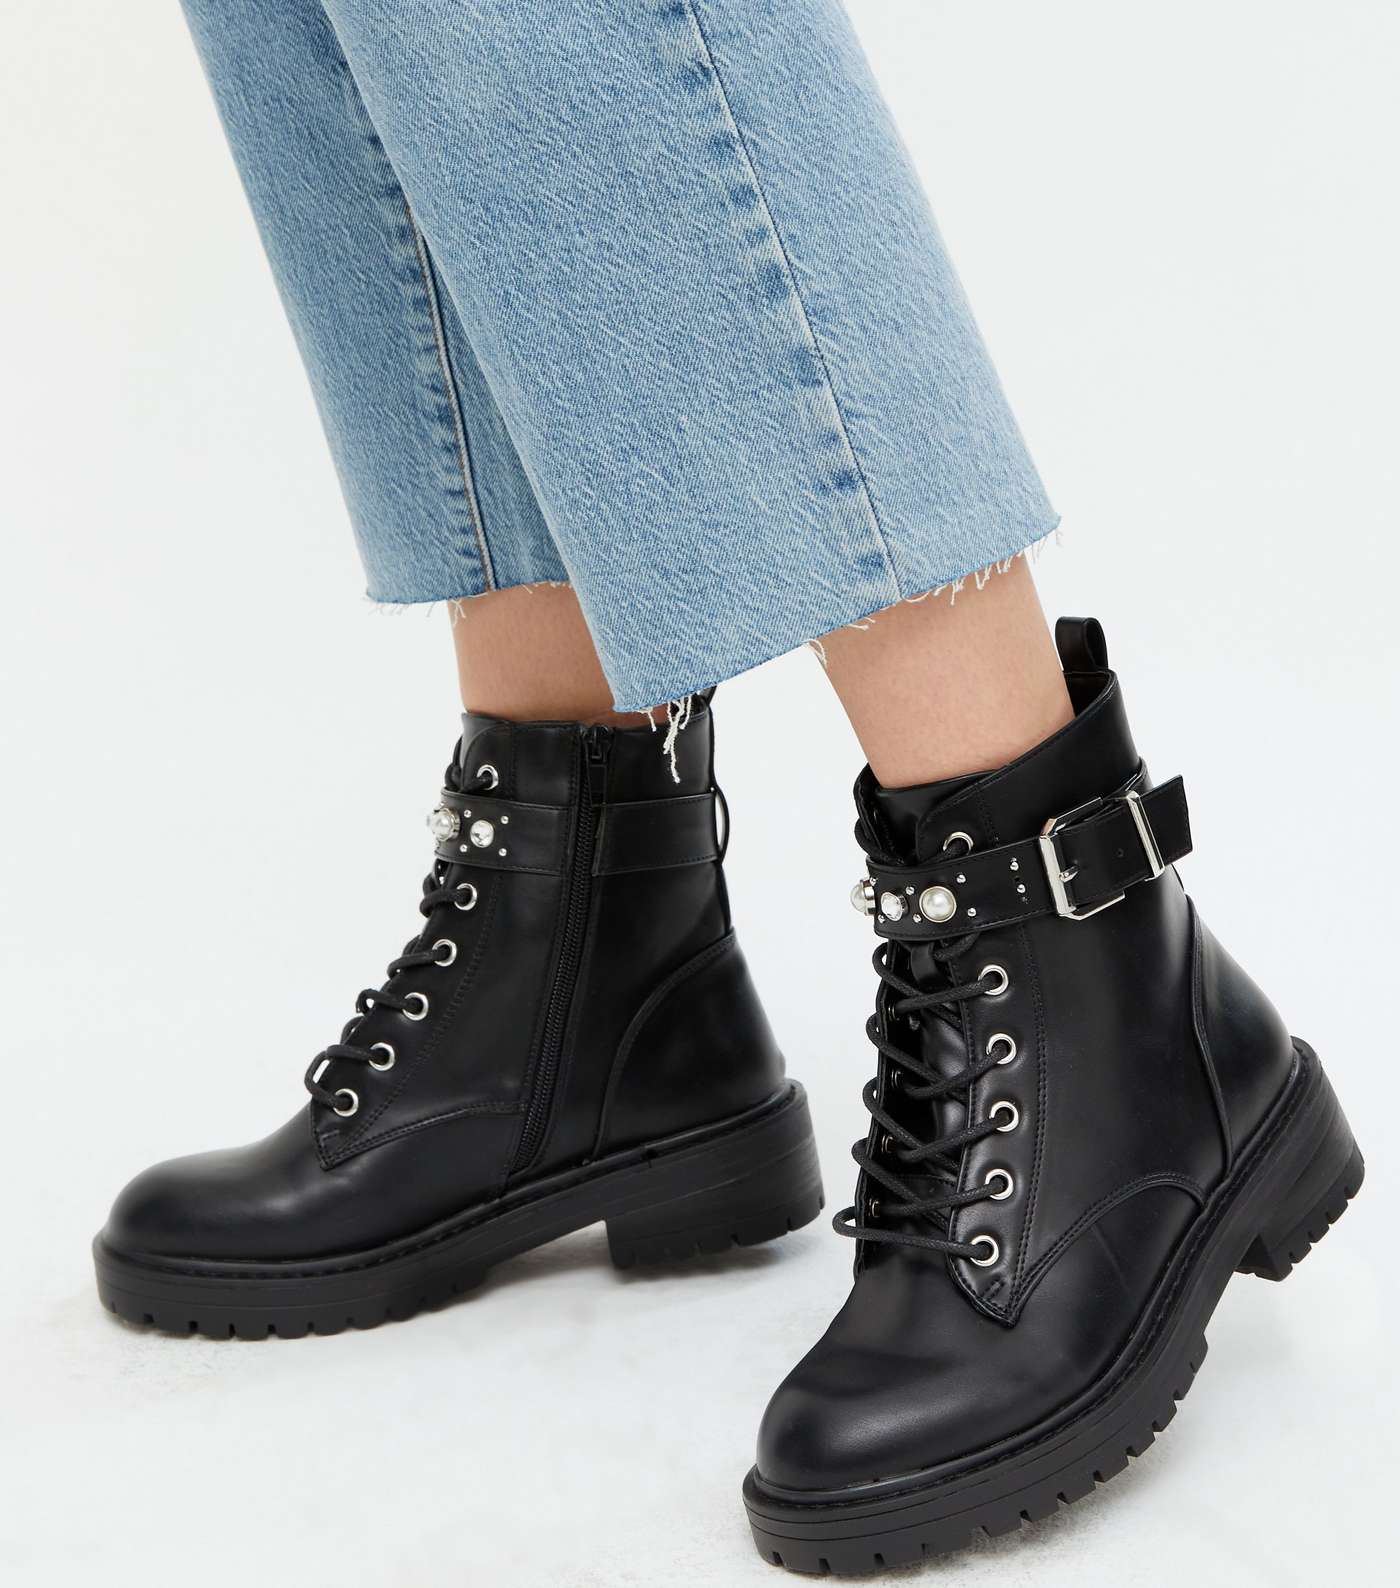 Black Leather-Look Stud Lace Up Ankle Boots  Image 2